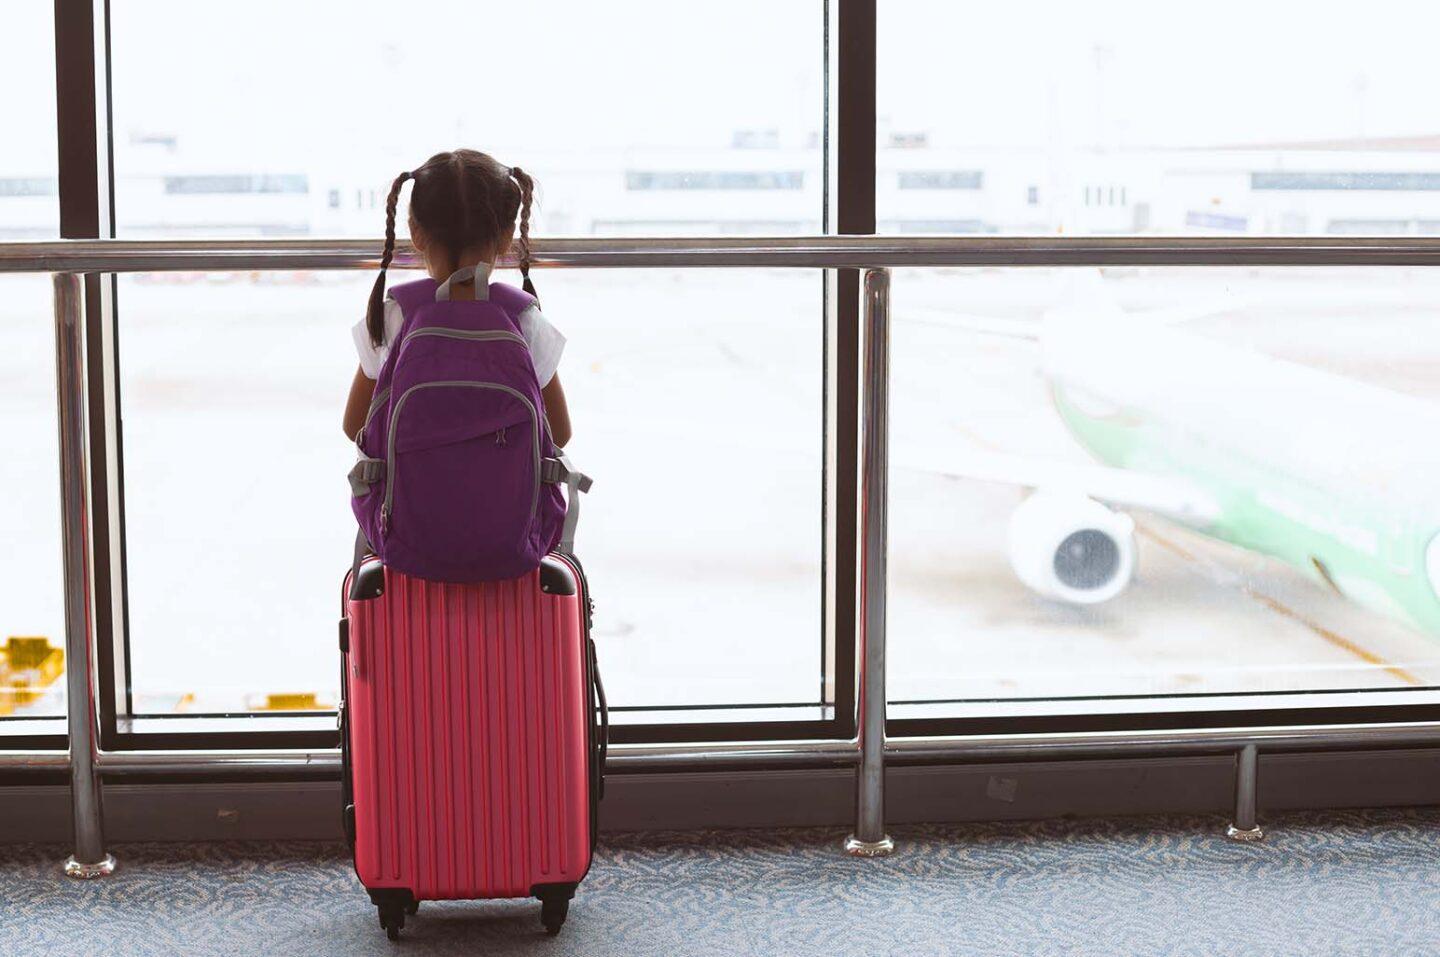 Child at Airport